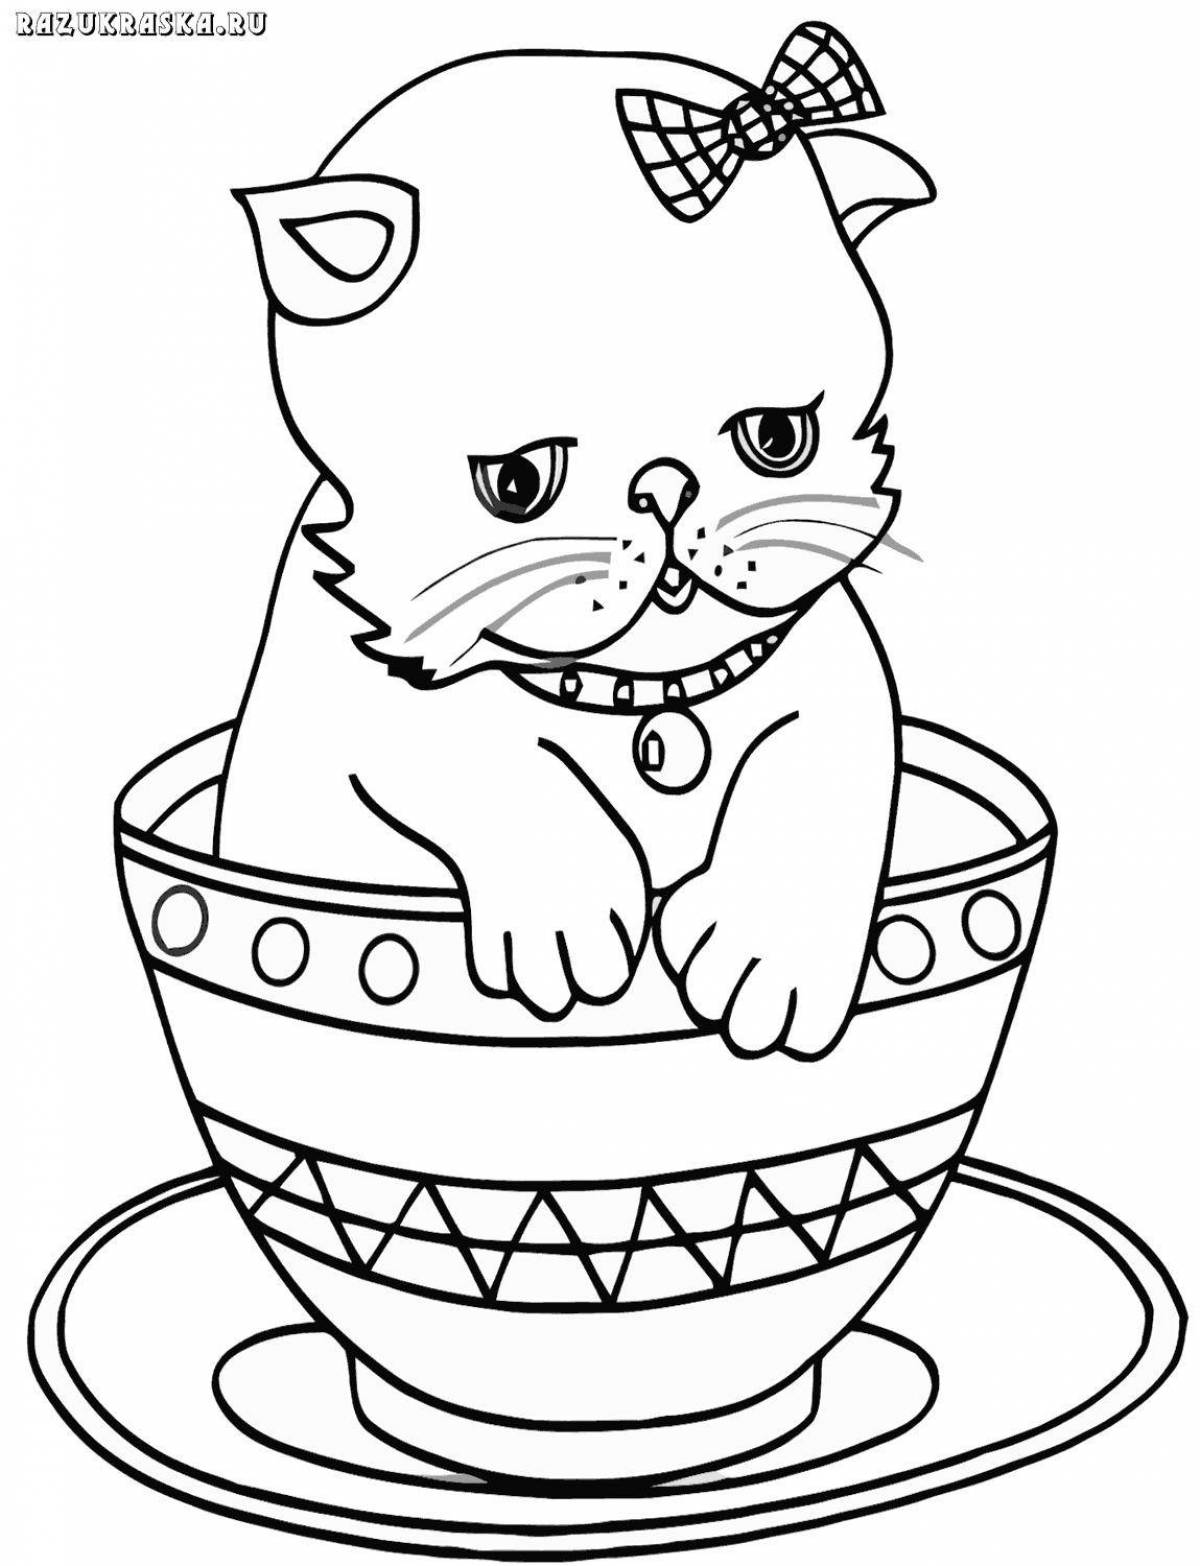 Coloring book bright kitten in a cup